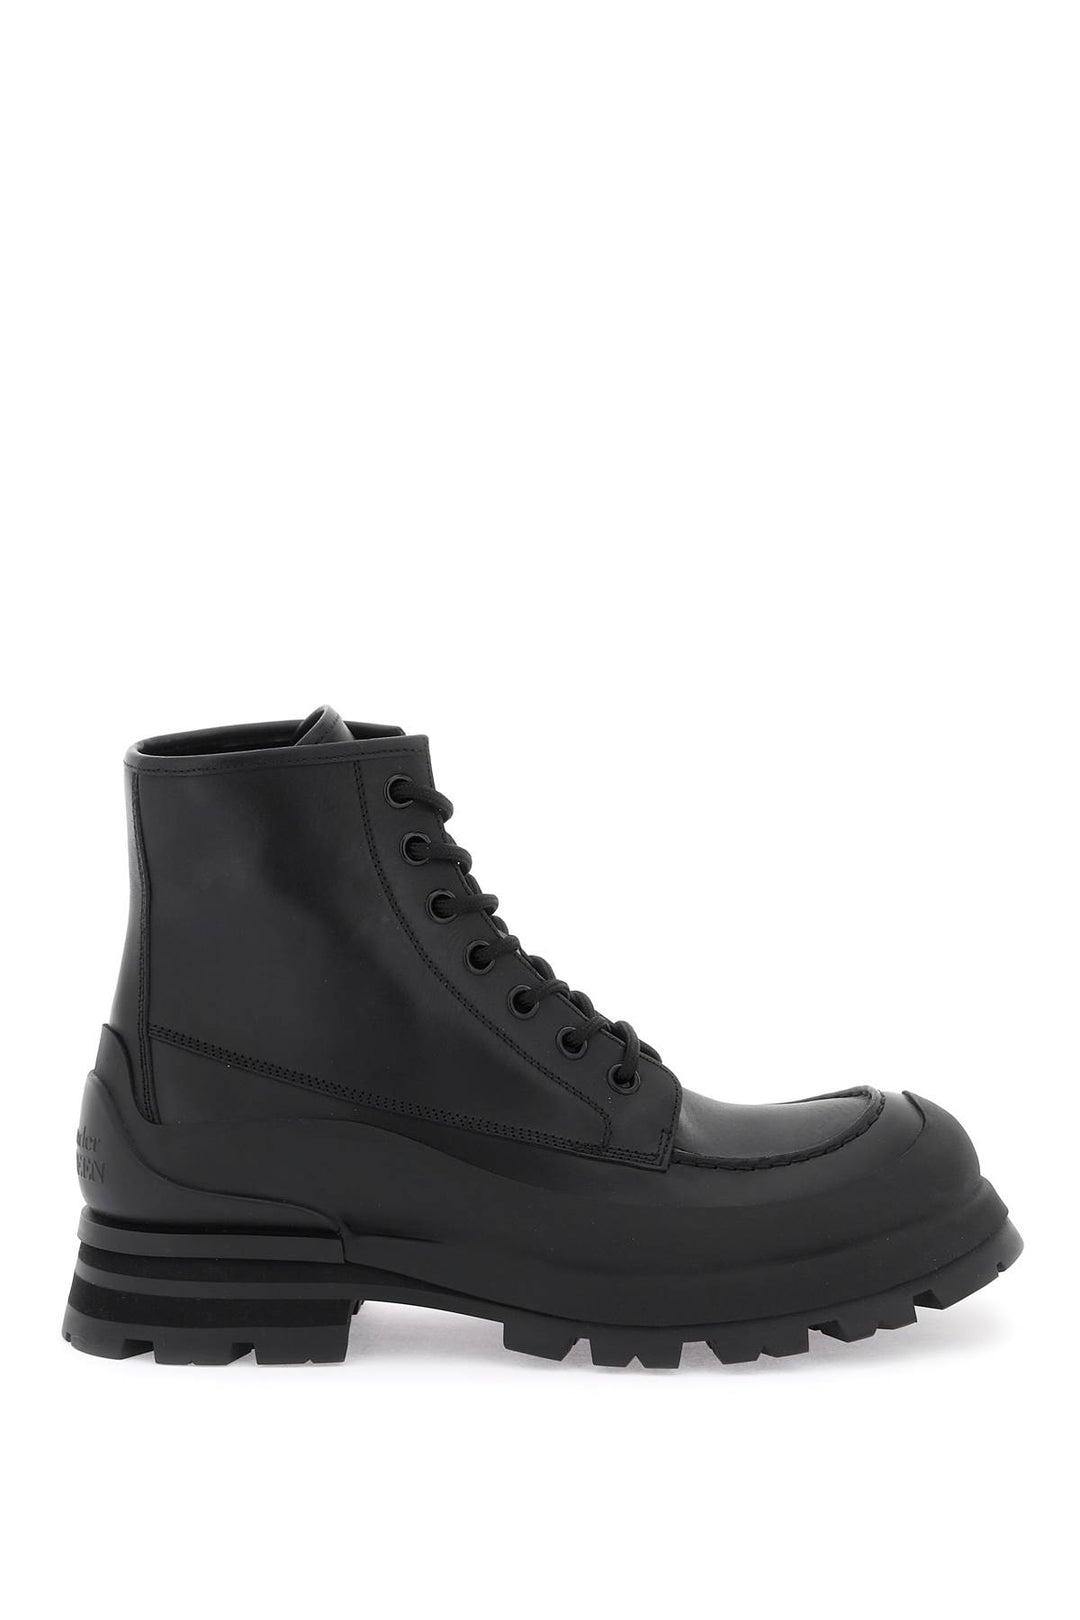 Alexander Mcqueen Leather Ankle Boots   Nero